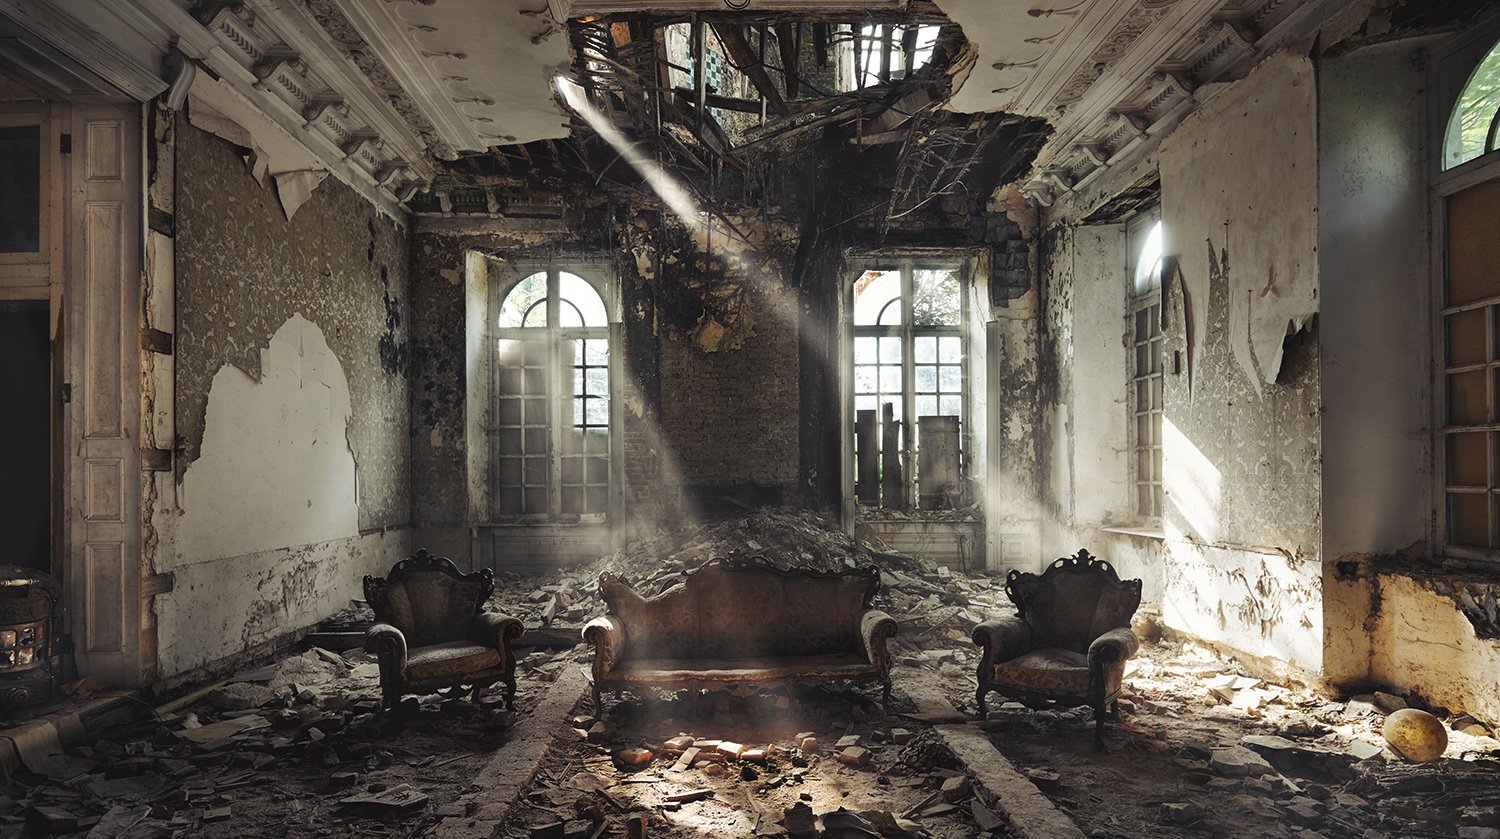 Photographer Spent 5 Years Capturing the Beauty of Decaying Buildings